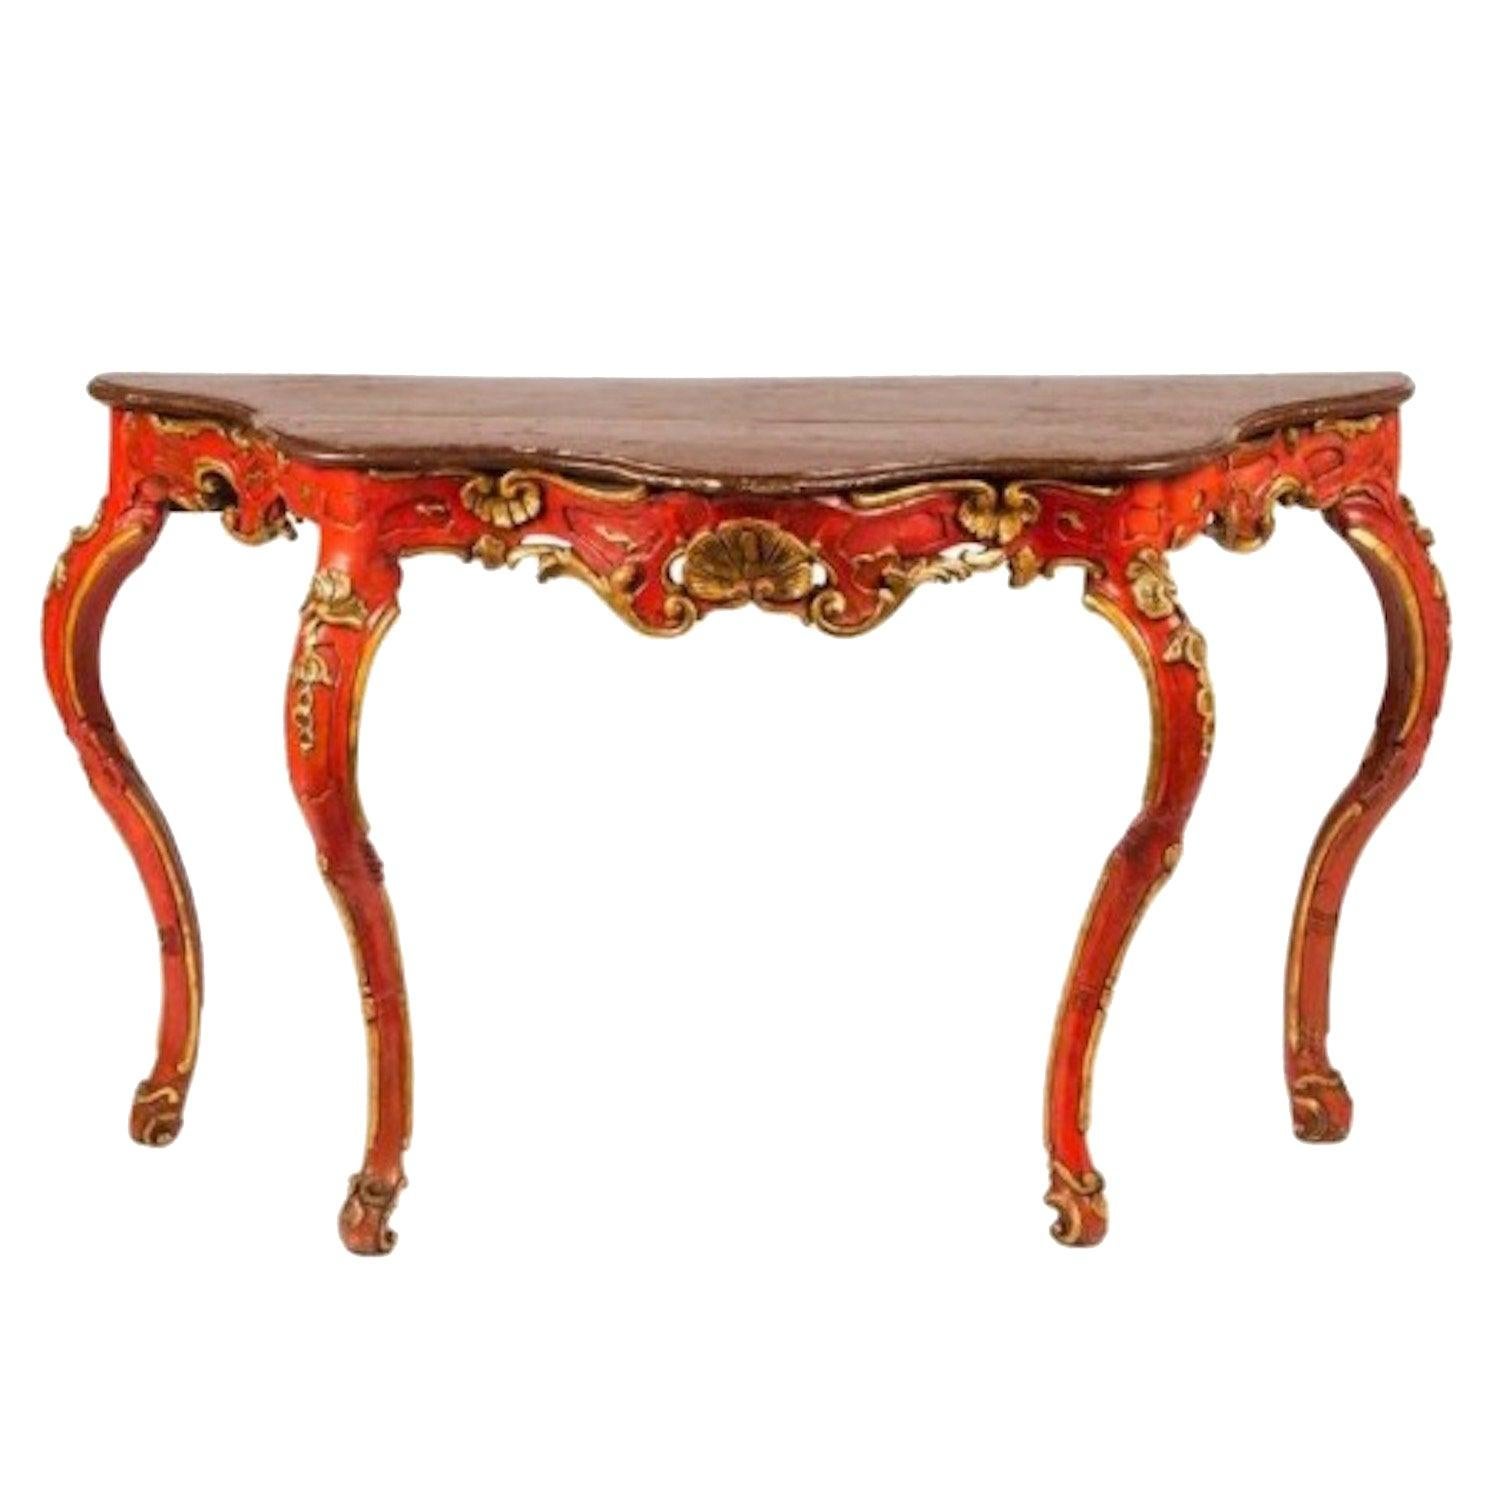 Rococo 18th Century Venetian Red Painted Parcel-Gilt Serpentine Console Table For Sale